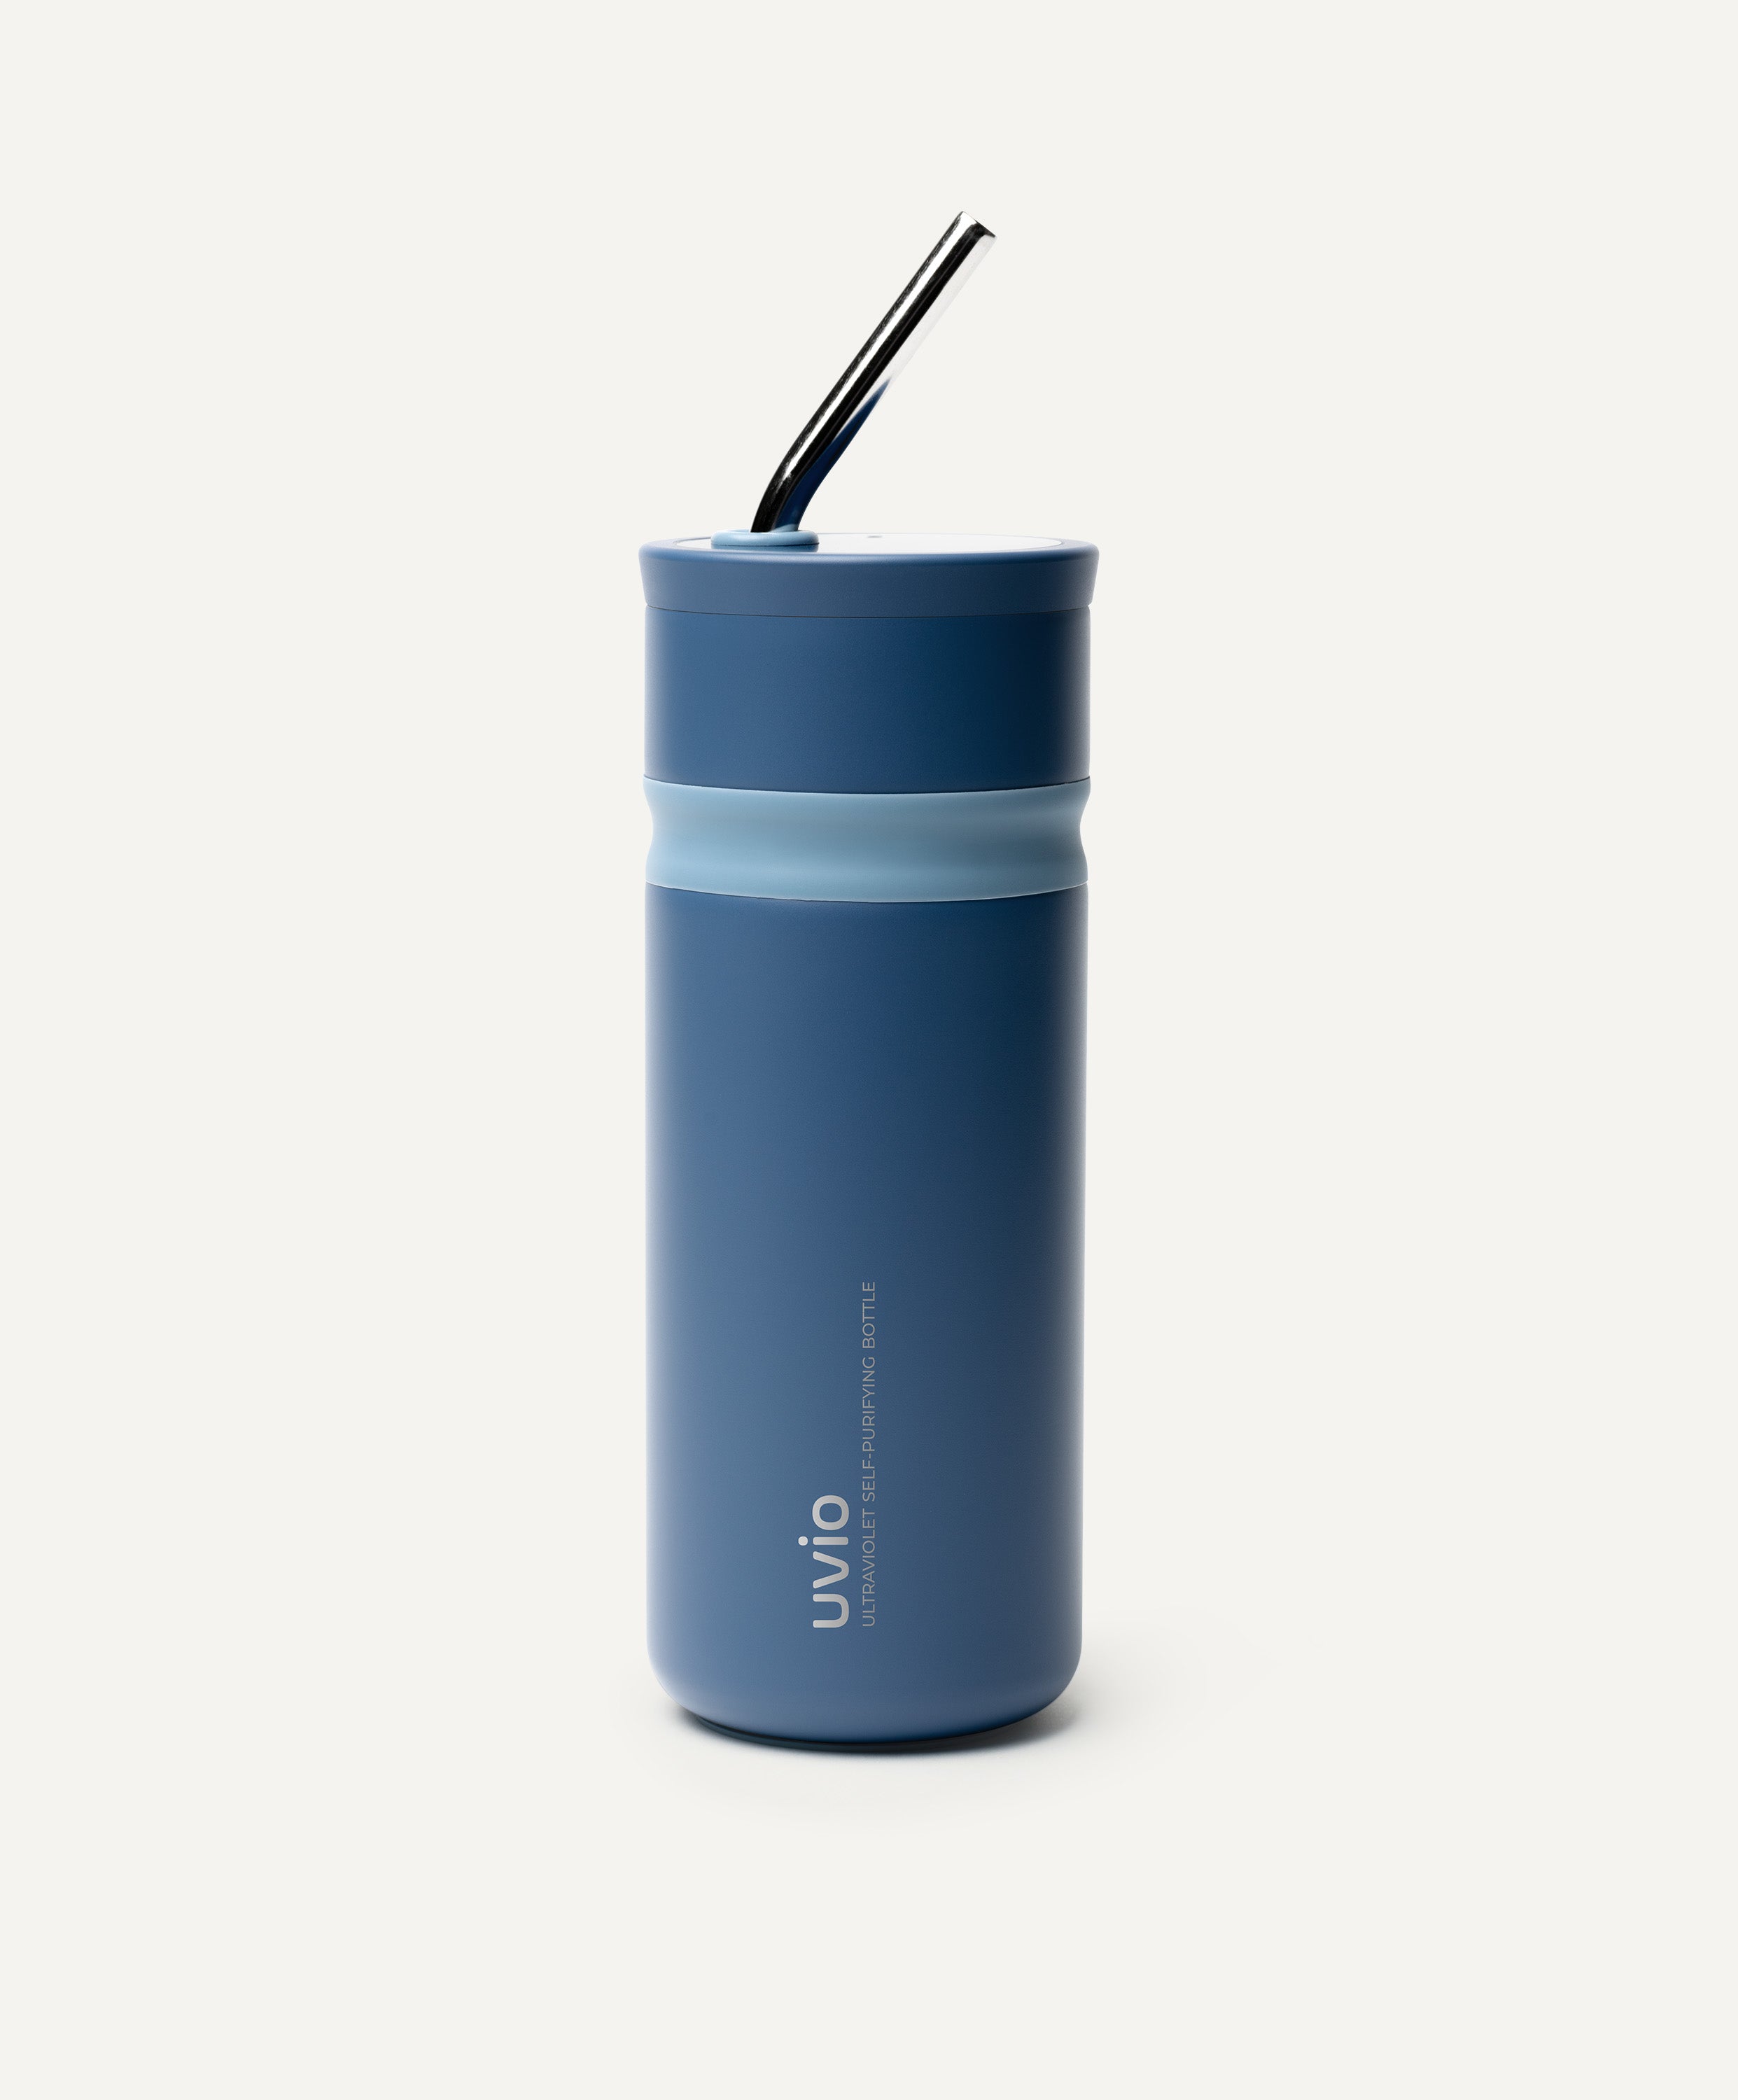 Uvio Self-purifying Water Bottle - Picasso Blue